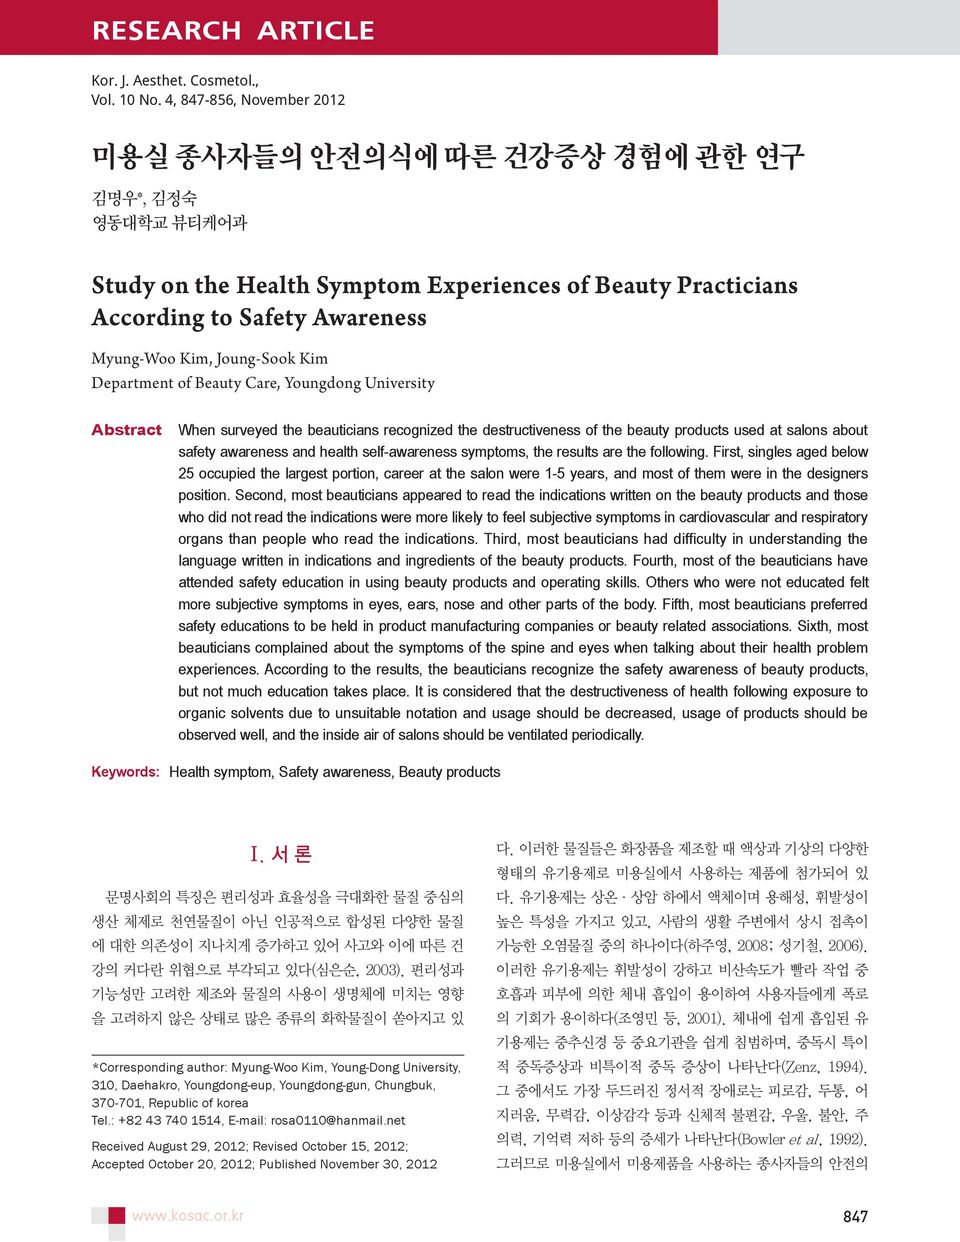 Beauty Care, Youngdong University Abstract When surveyed the beauticians recognized the destructiveness of the beauty products used at salons about safety awareness and health self-awareness